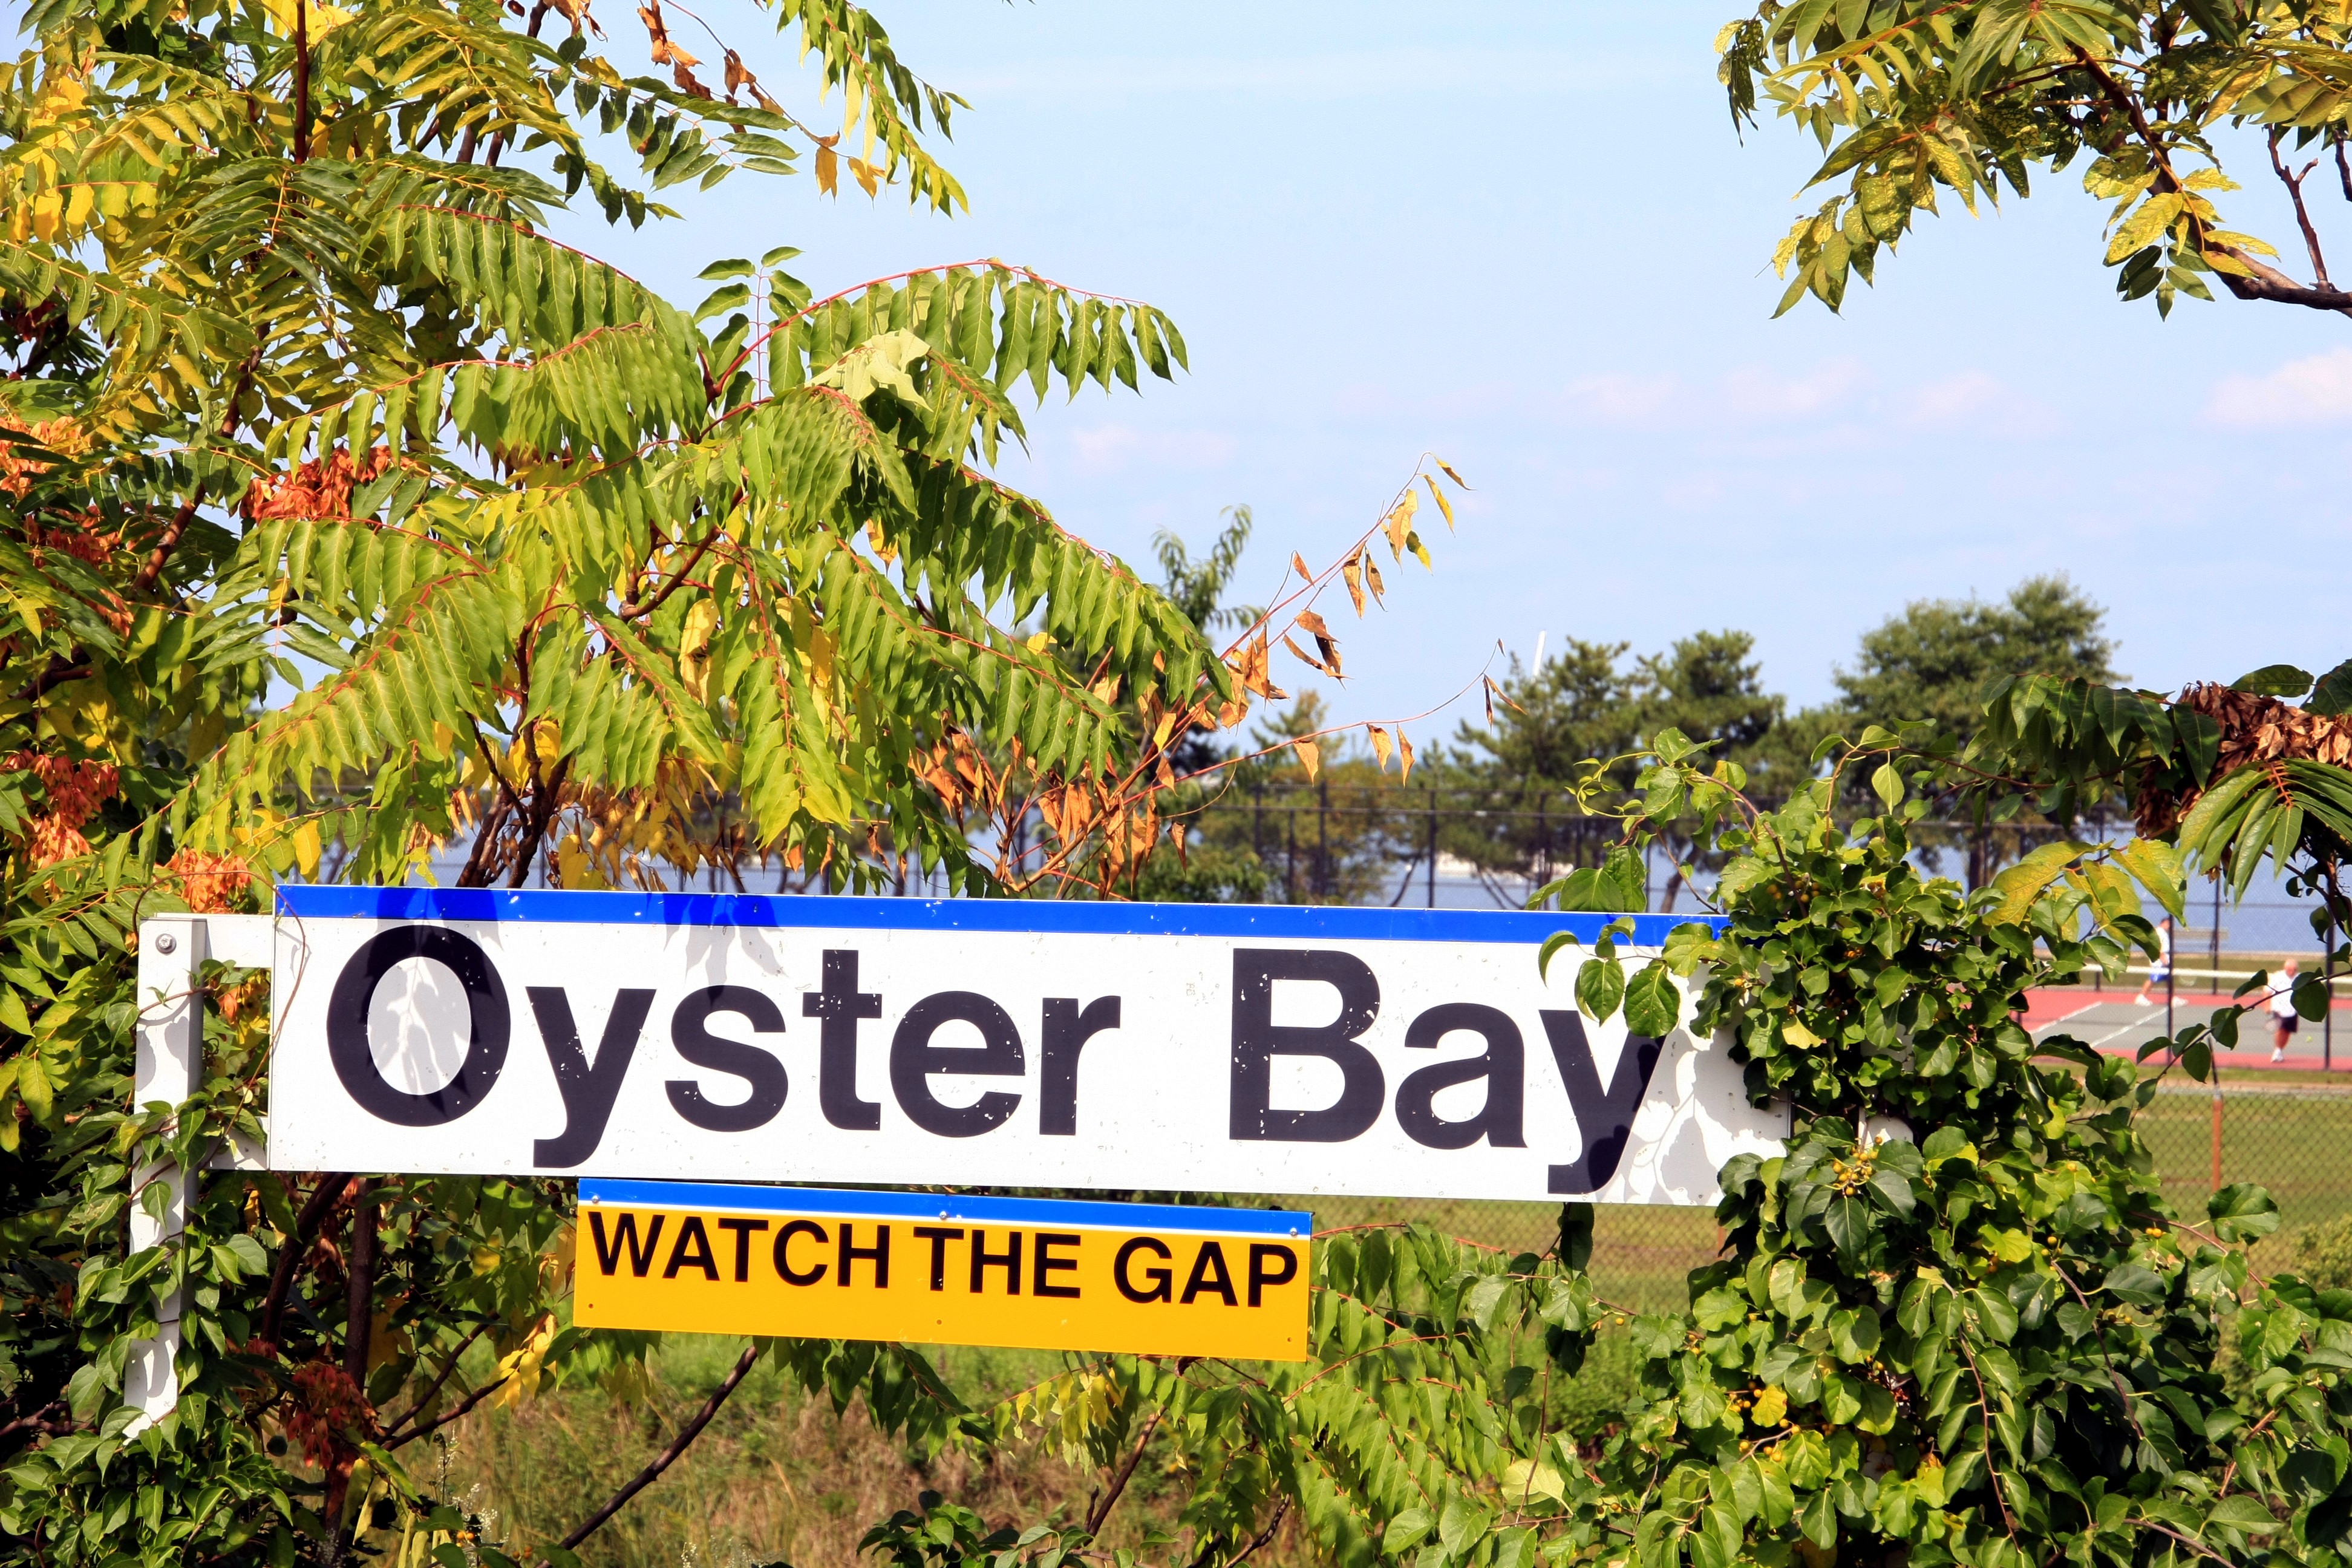 August 29: Buses Substitute for Morning Trains Between Oyster Bay and Locust Valley